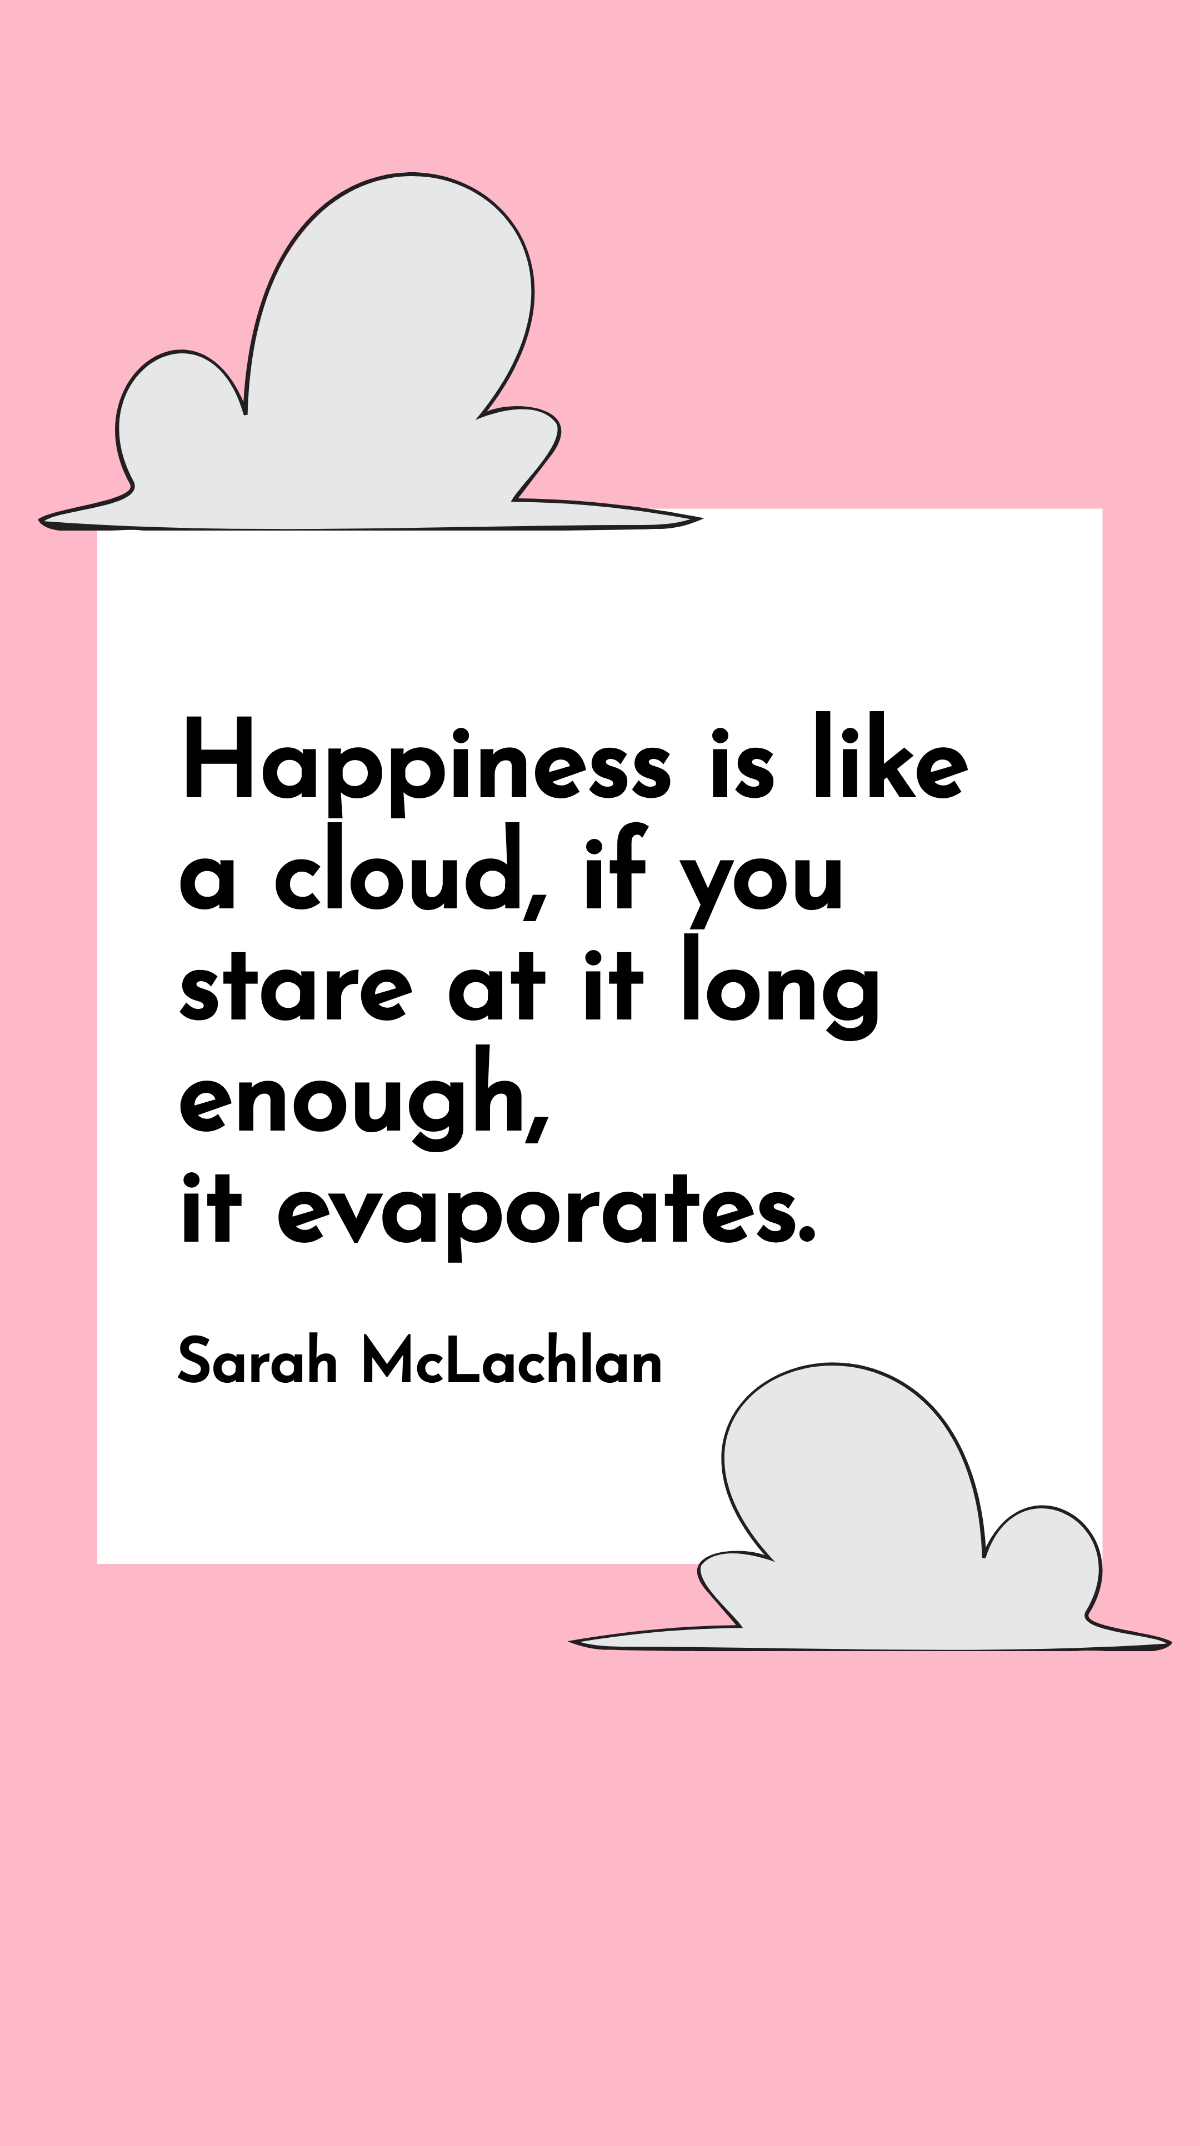 Sarah McLachlan - Happiness is like a cloud, if you stare at it long enough, it evaporates. Template